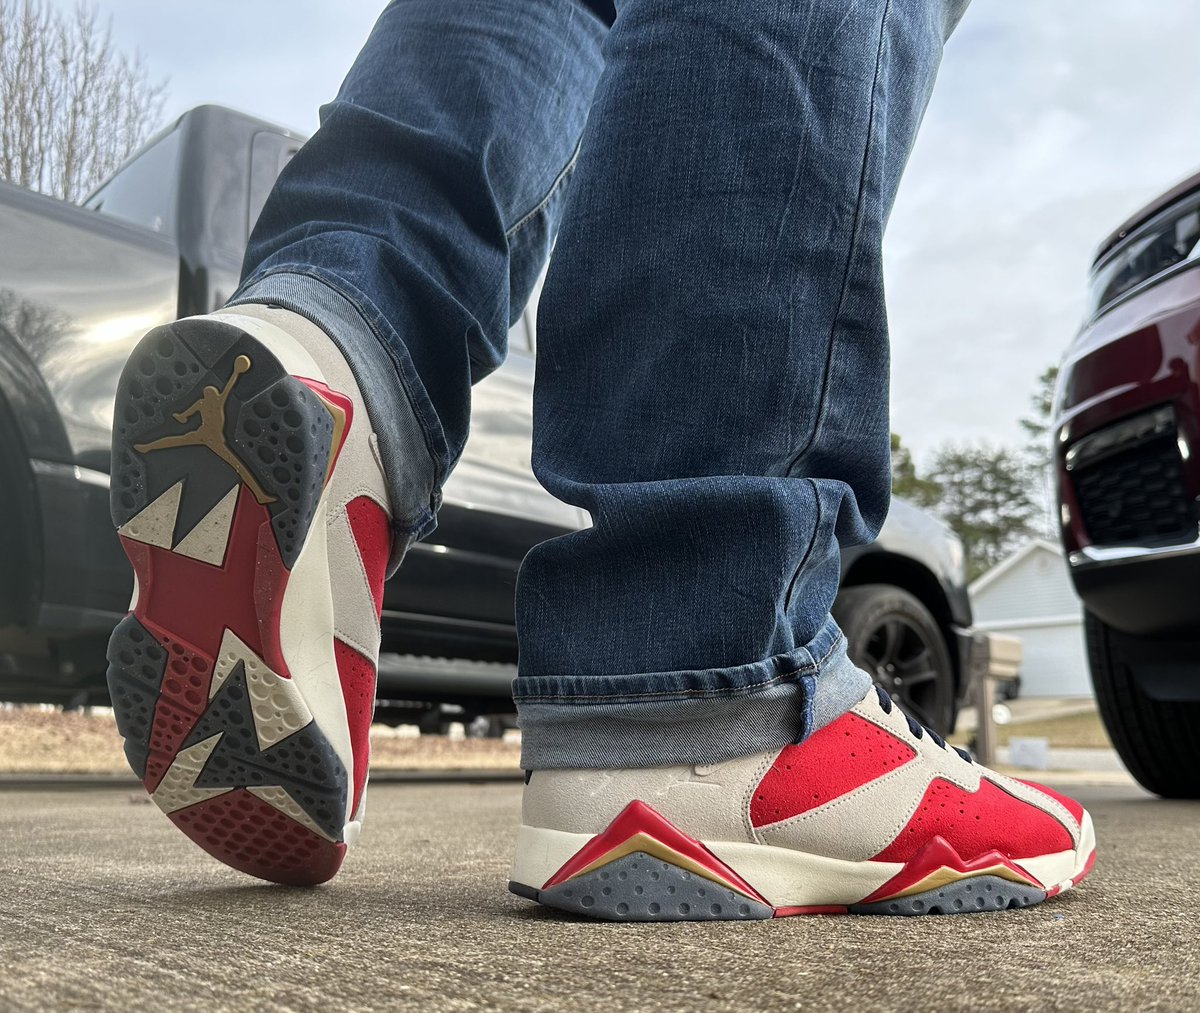 #trophyroom #snkrsliveheatingup #kotd  I went the trophy room Jordan 7 today to go finish some Christmas shopping. I hope everyone has a great day.